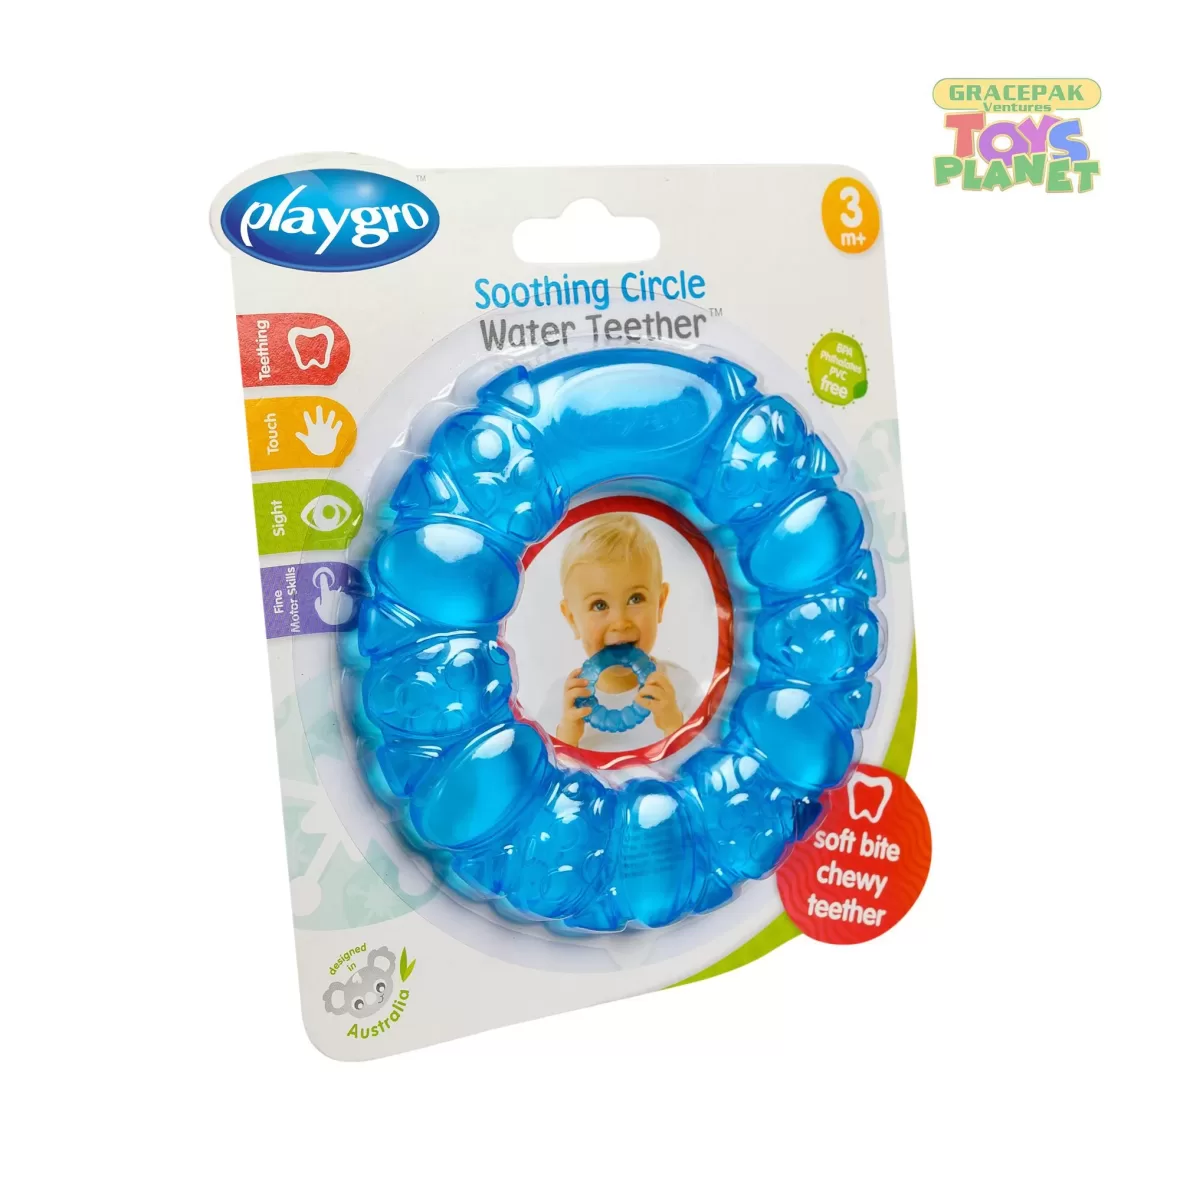 Playgro_Soothing Circle Water Teether Blue_2